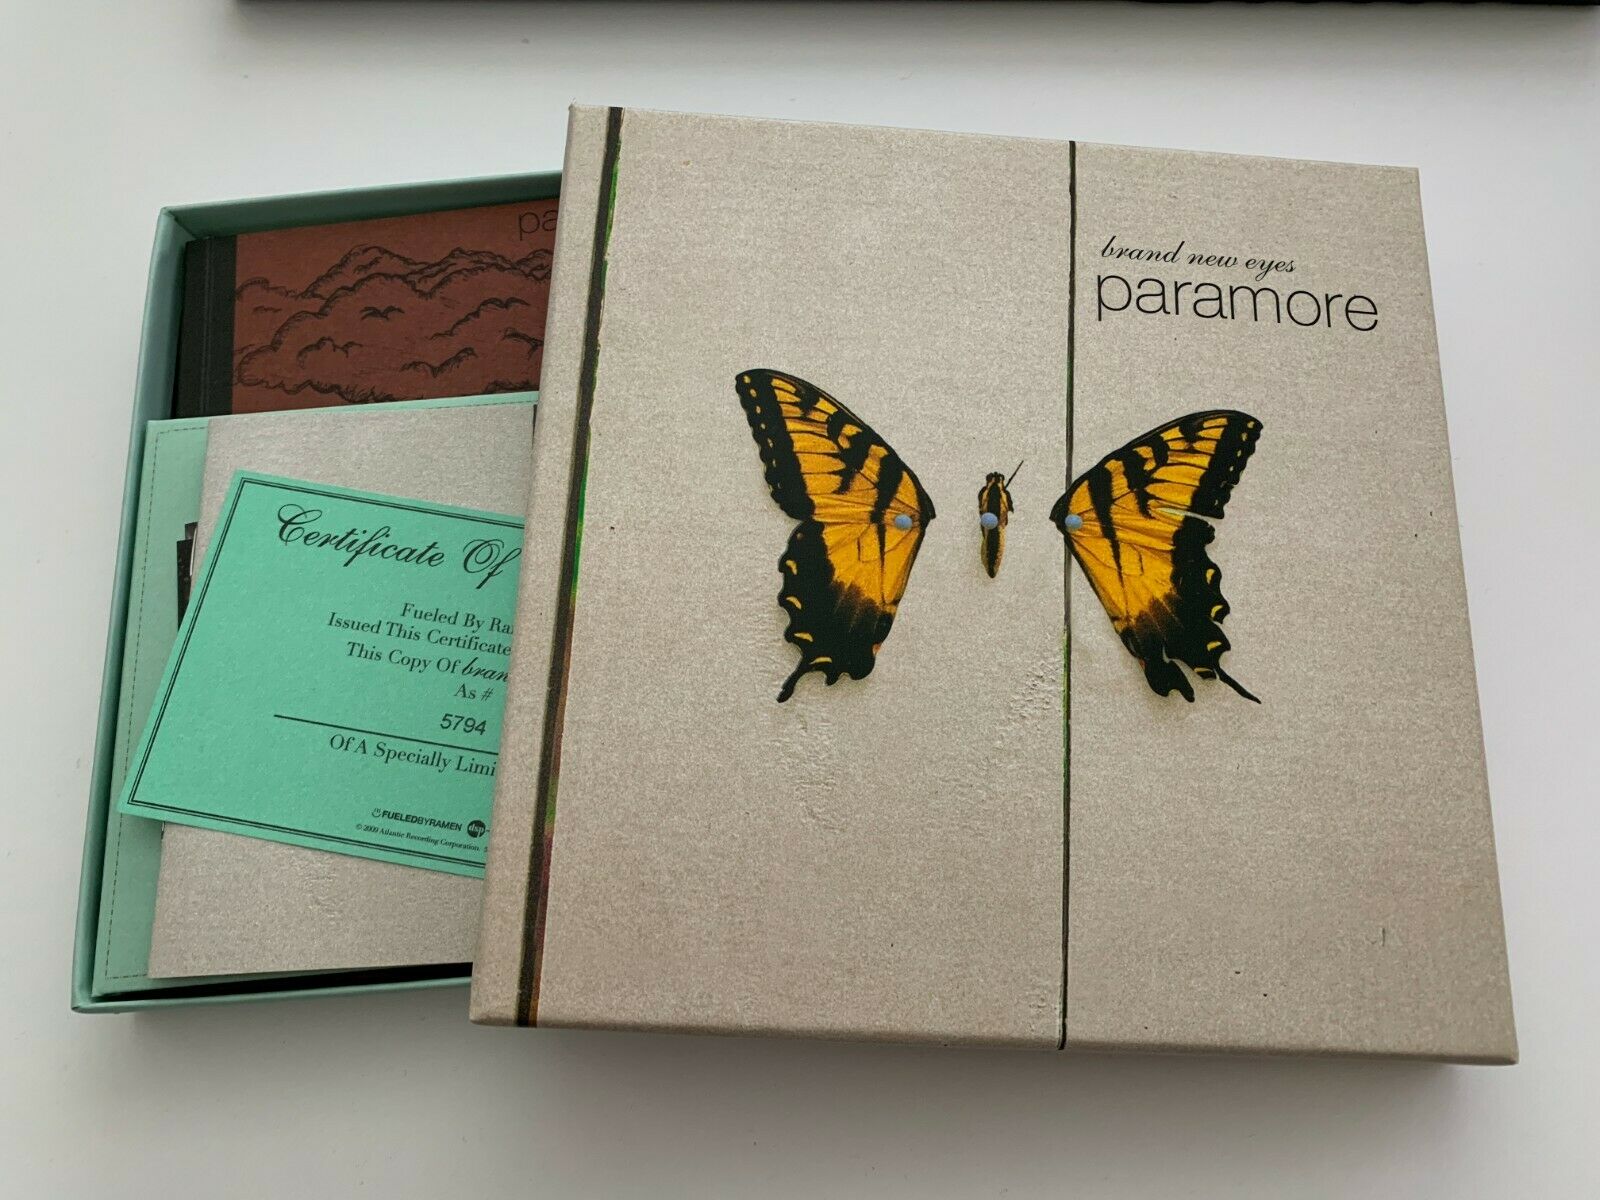 Paramore - The Only Exception (Brand New Eyes Deluxe Edition